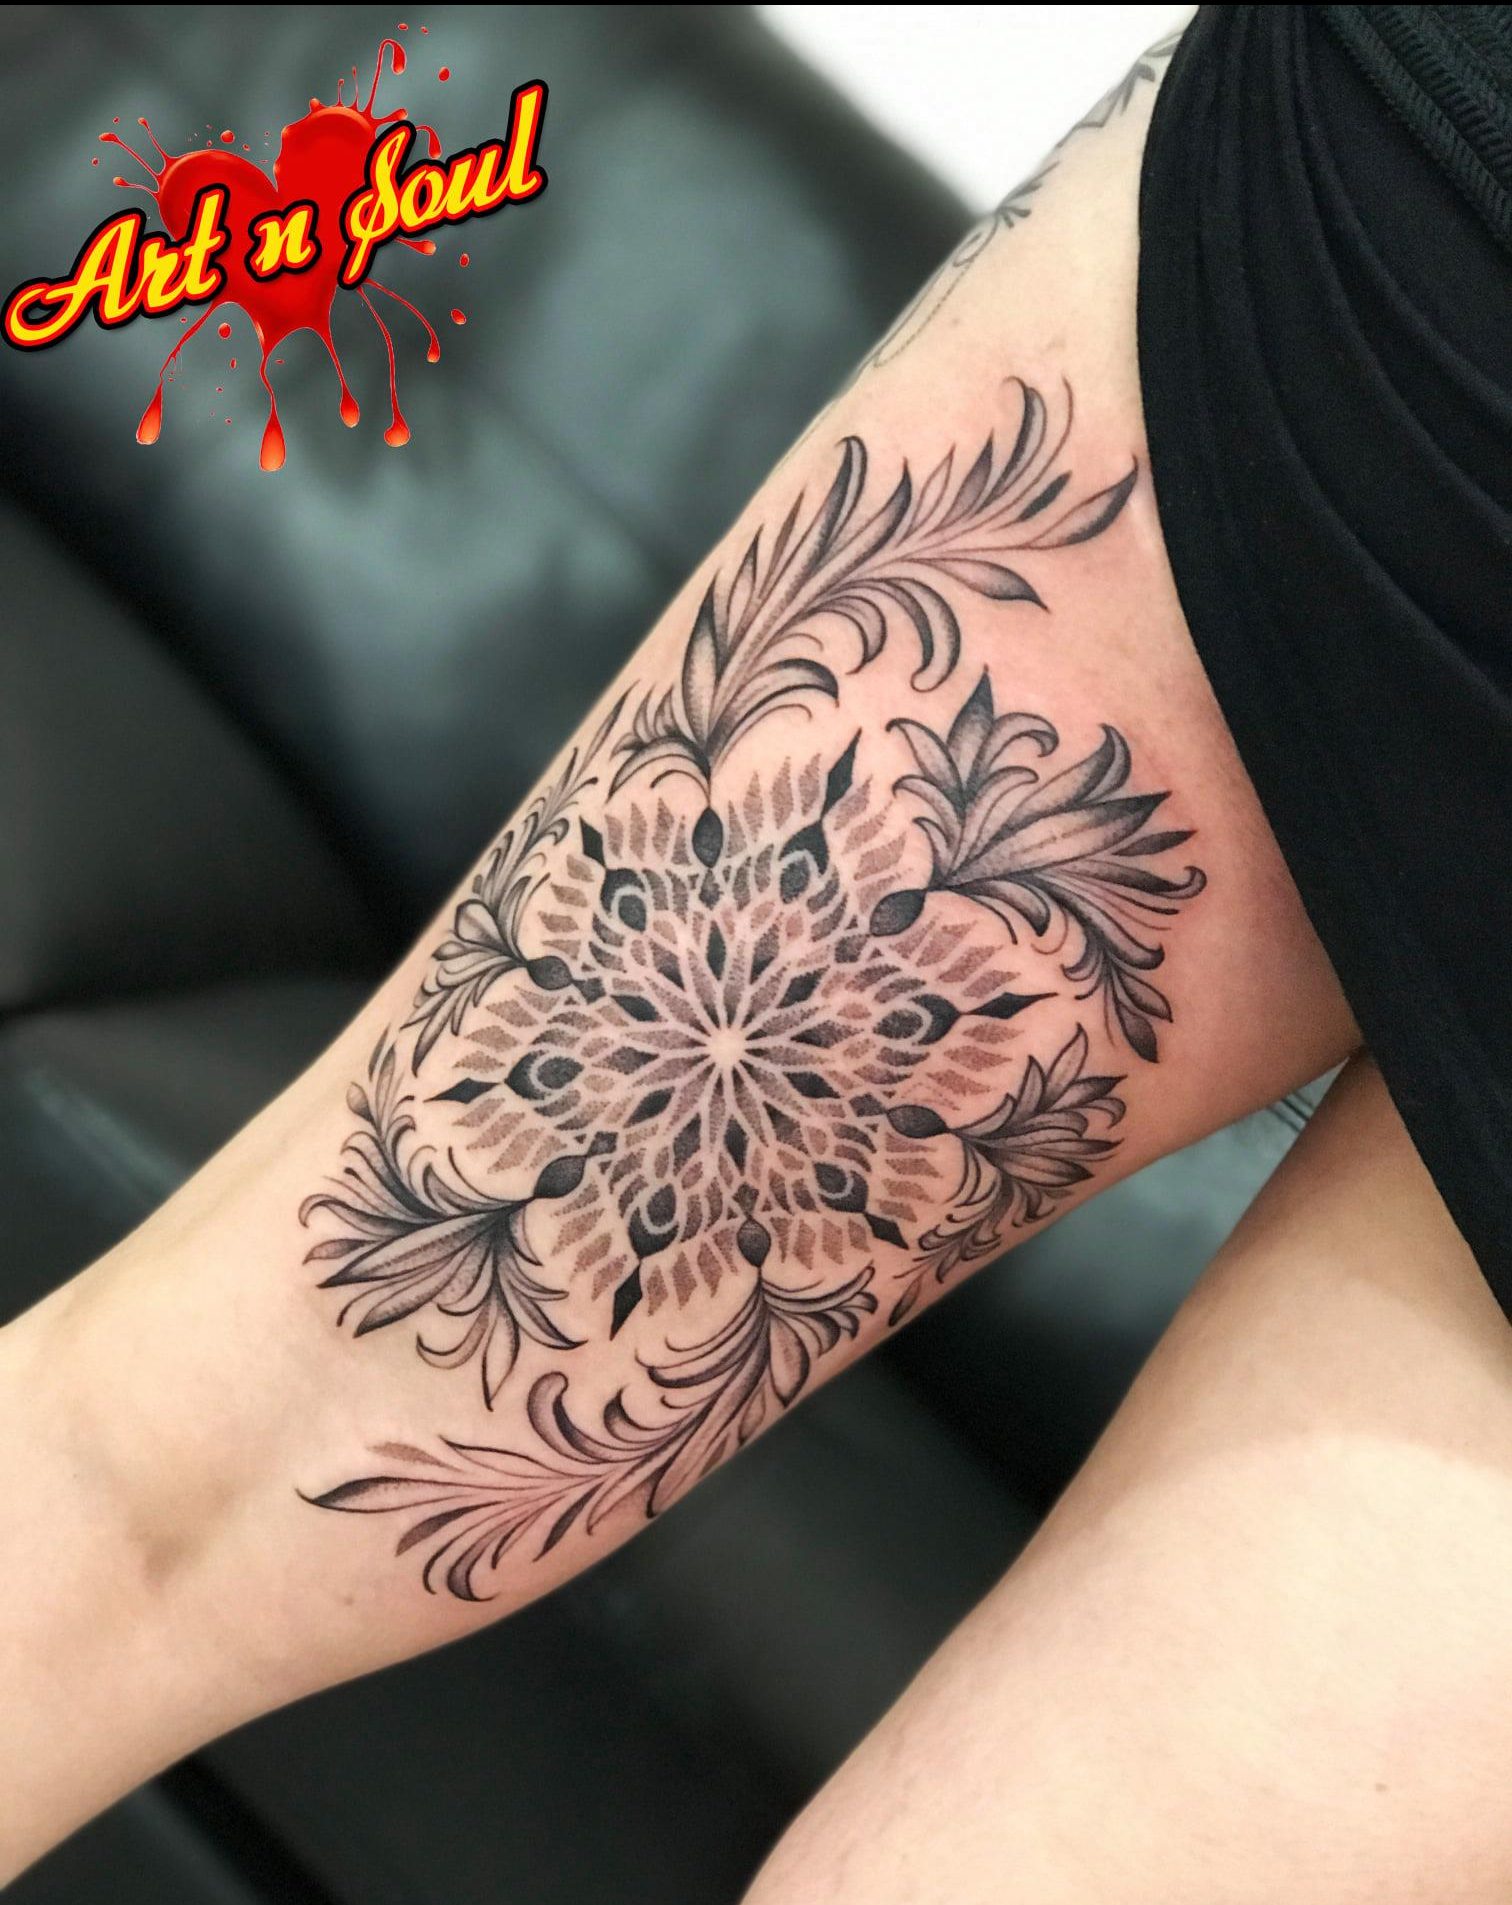 Tattoo Artists in Adelaide